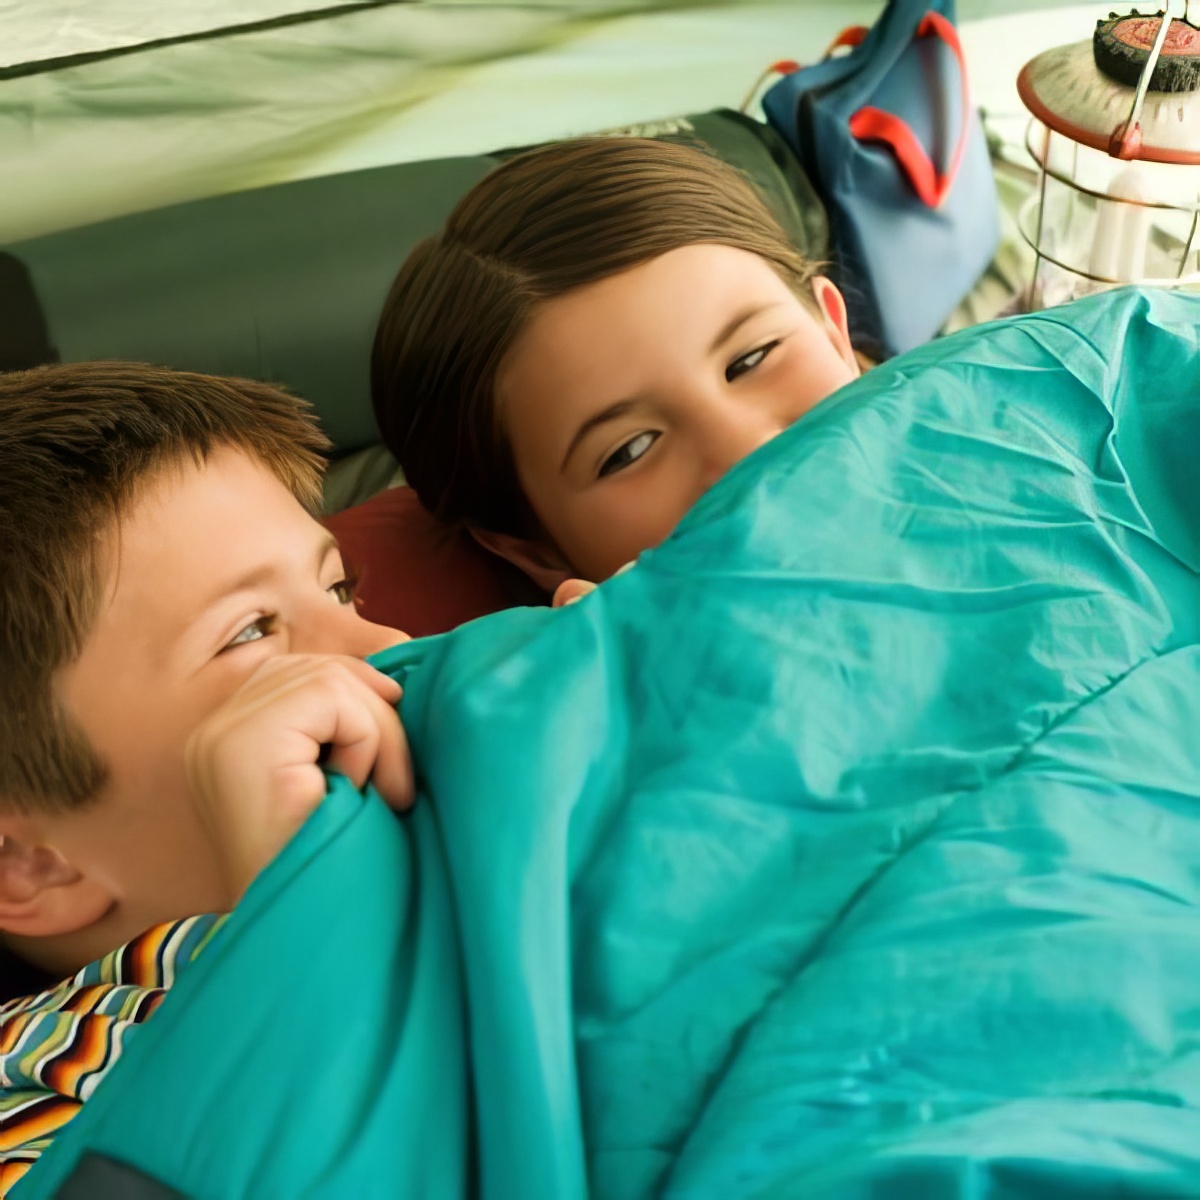 Set the tent indoors for a fun staycation camping trip this weekend with your kids!